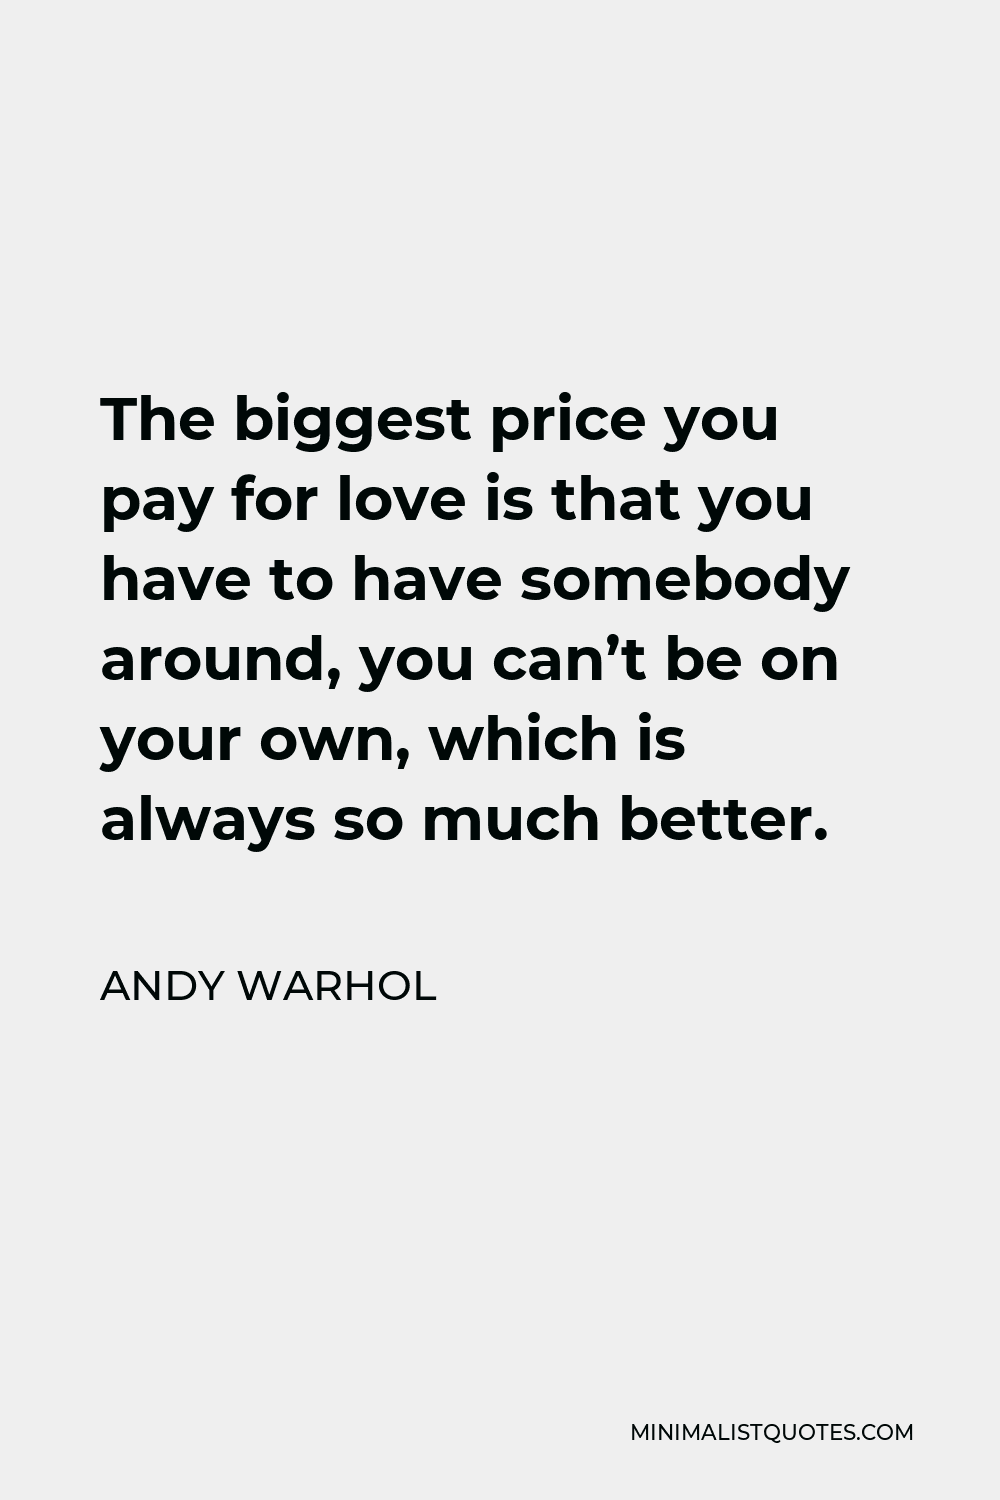 Andy Warhol Quote - The biggest price you pay for love is that you have to have somebody around, you can’t be on your own, which is always so much better.